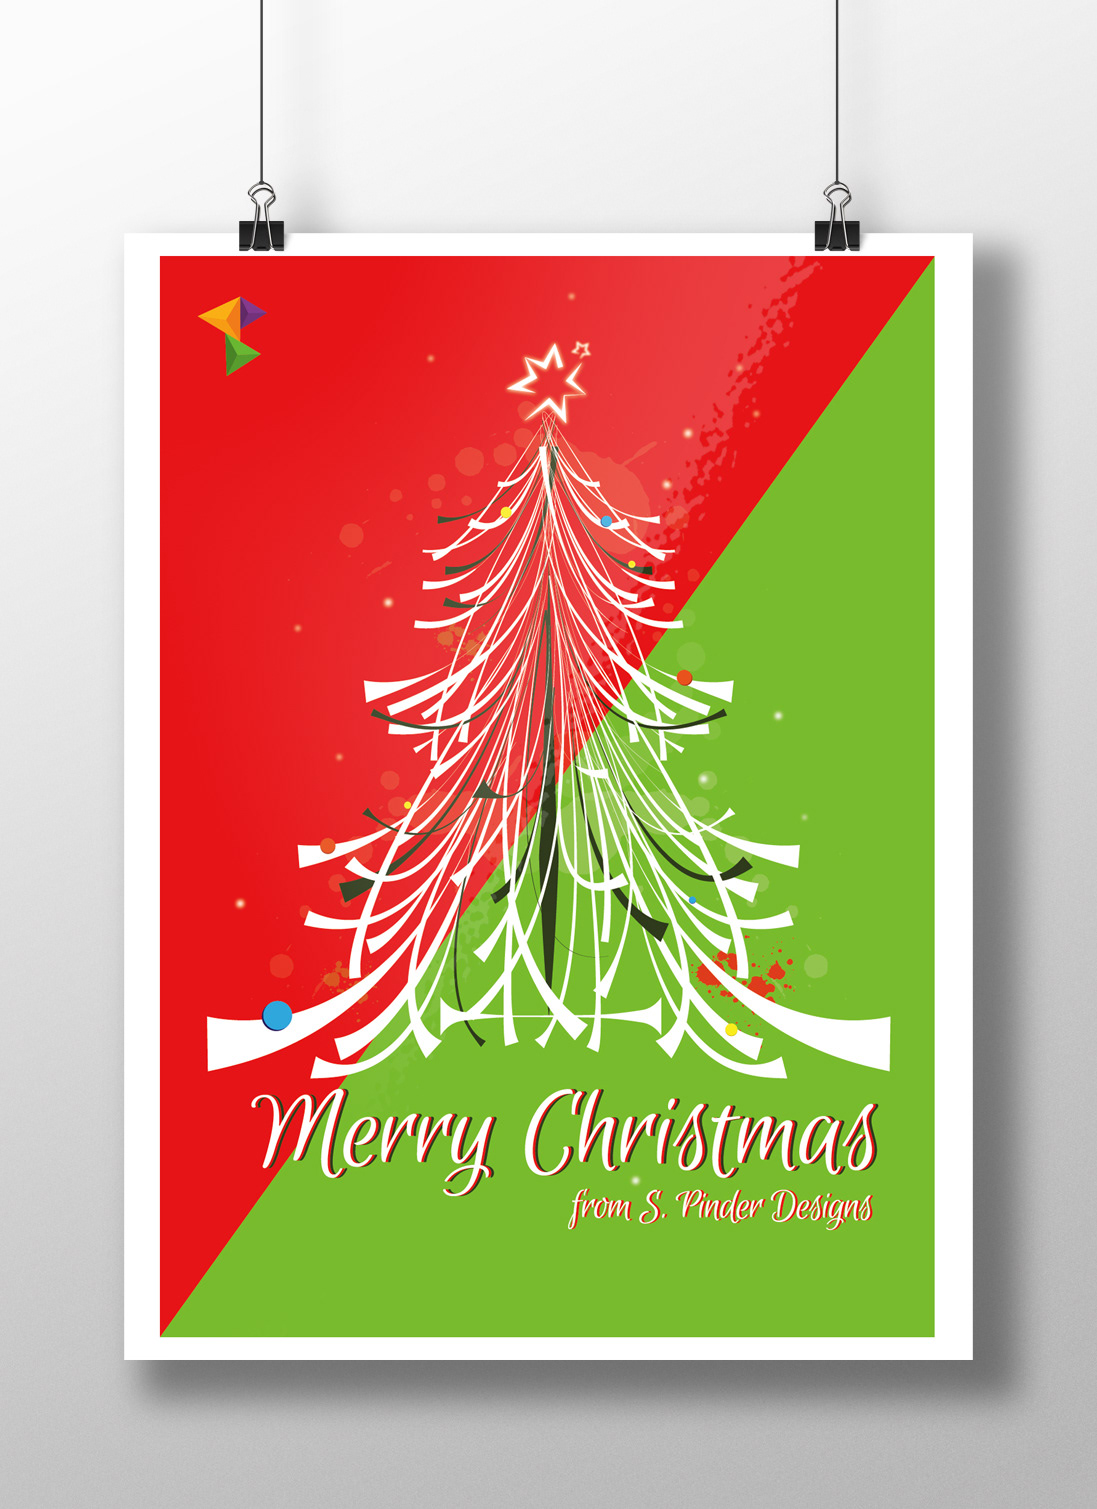 christmas card Christmas tree illustration year 2014 new year Desktop Wallpaper celebrate season's greetings red and green